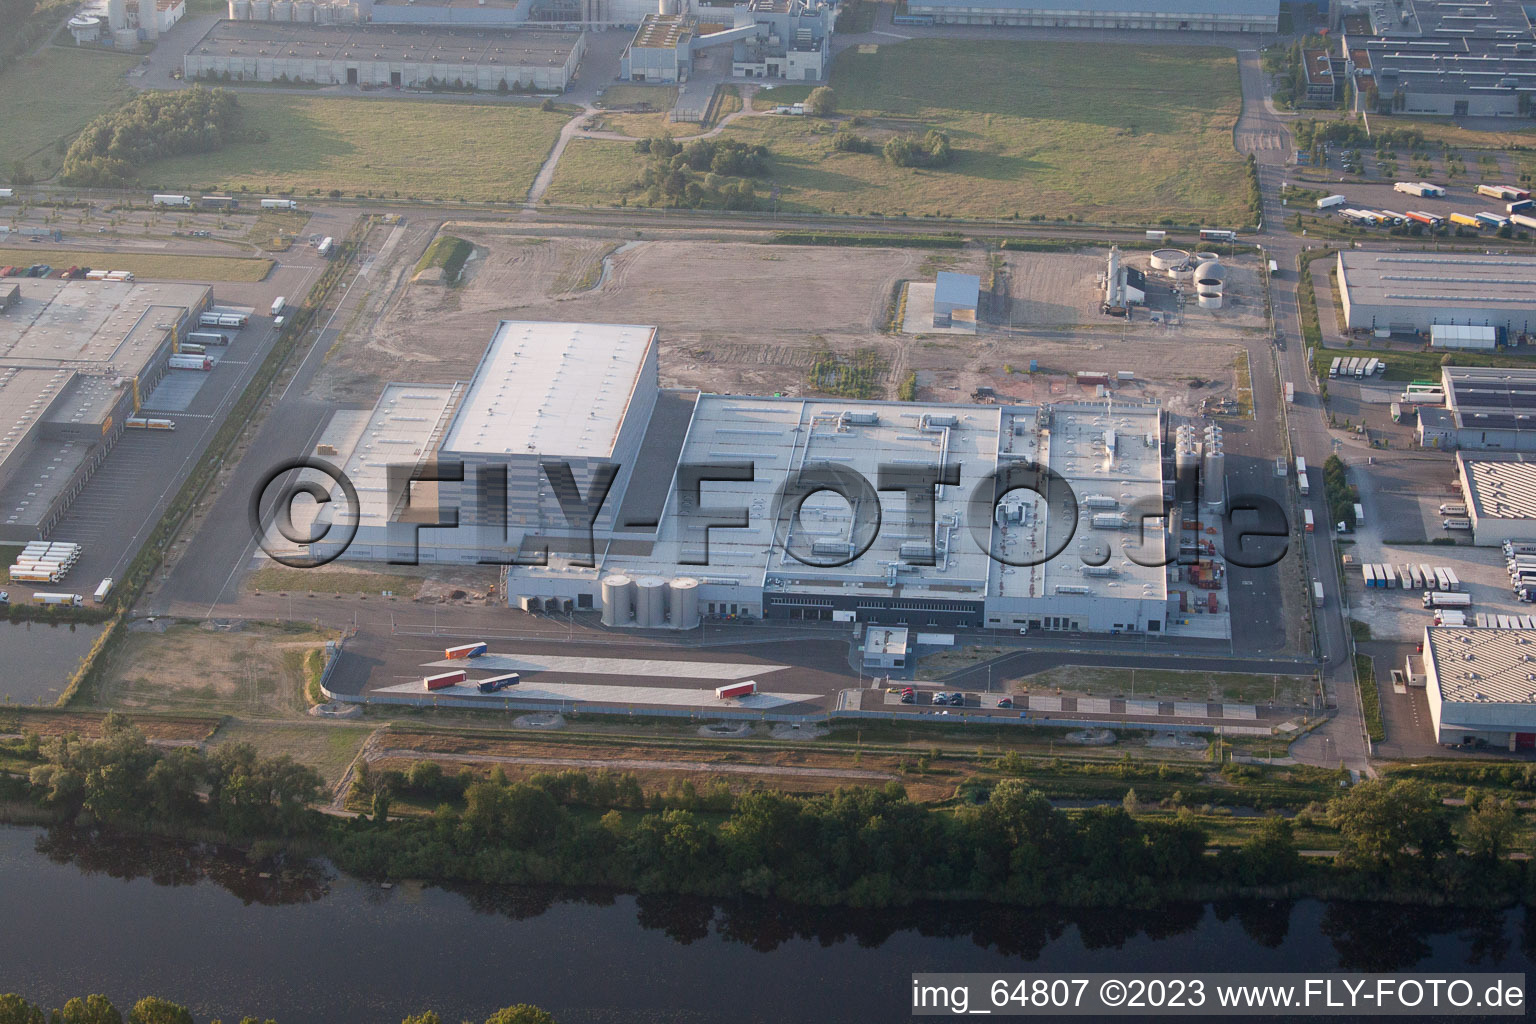 Oberwald industrial area, PEG in Wörth am Rhein in the state Rhineland-Palatinate, Germany from above